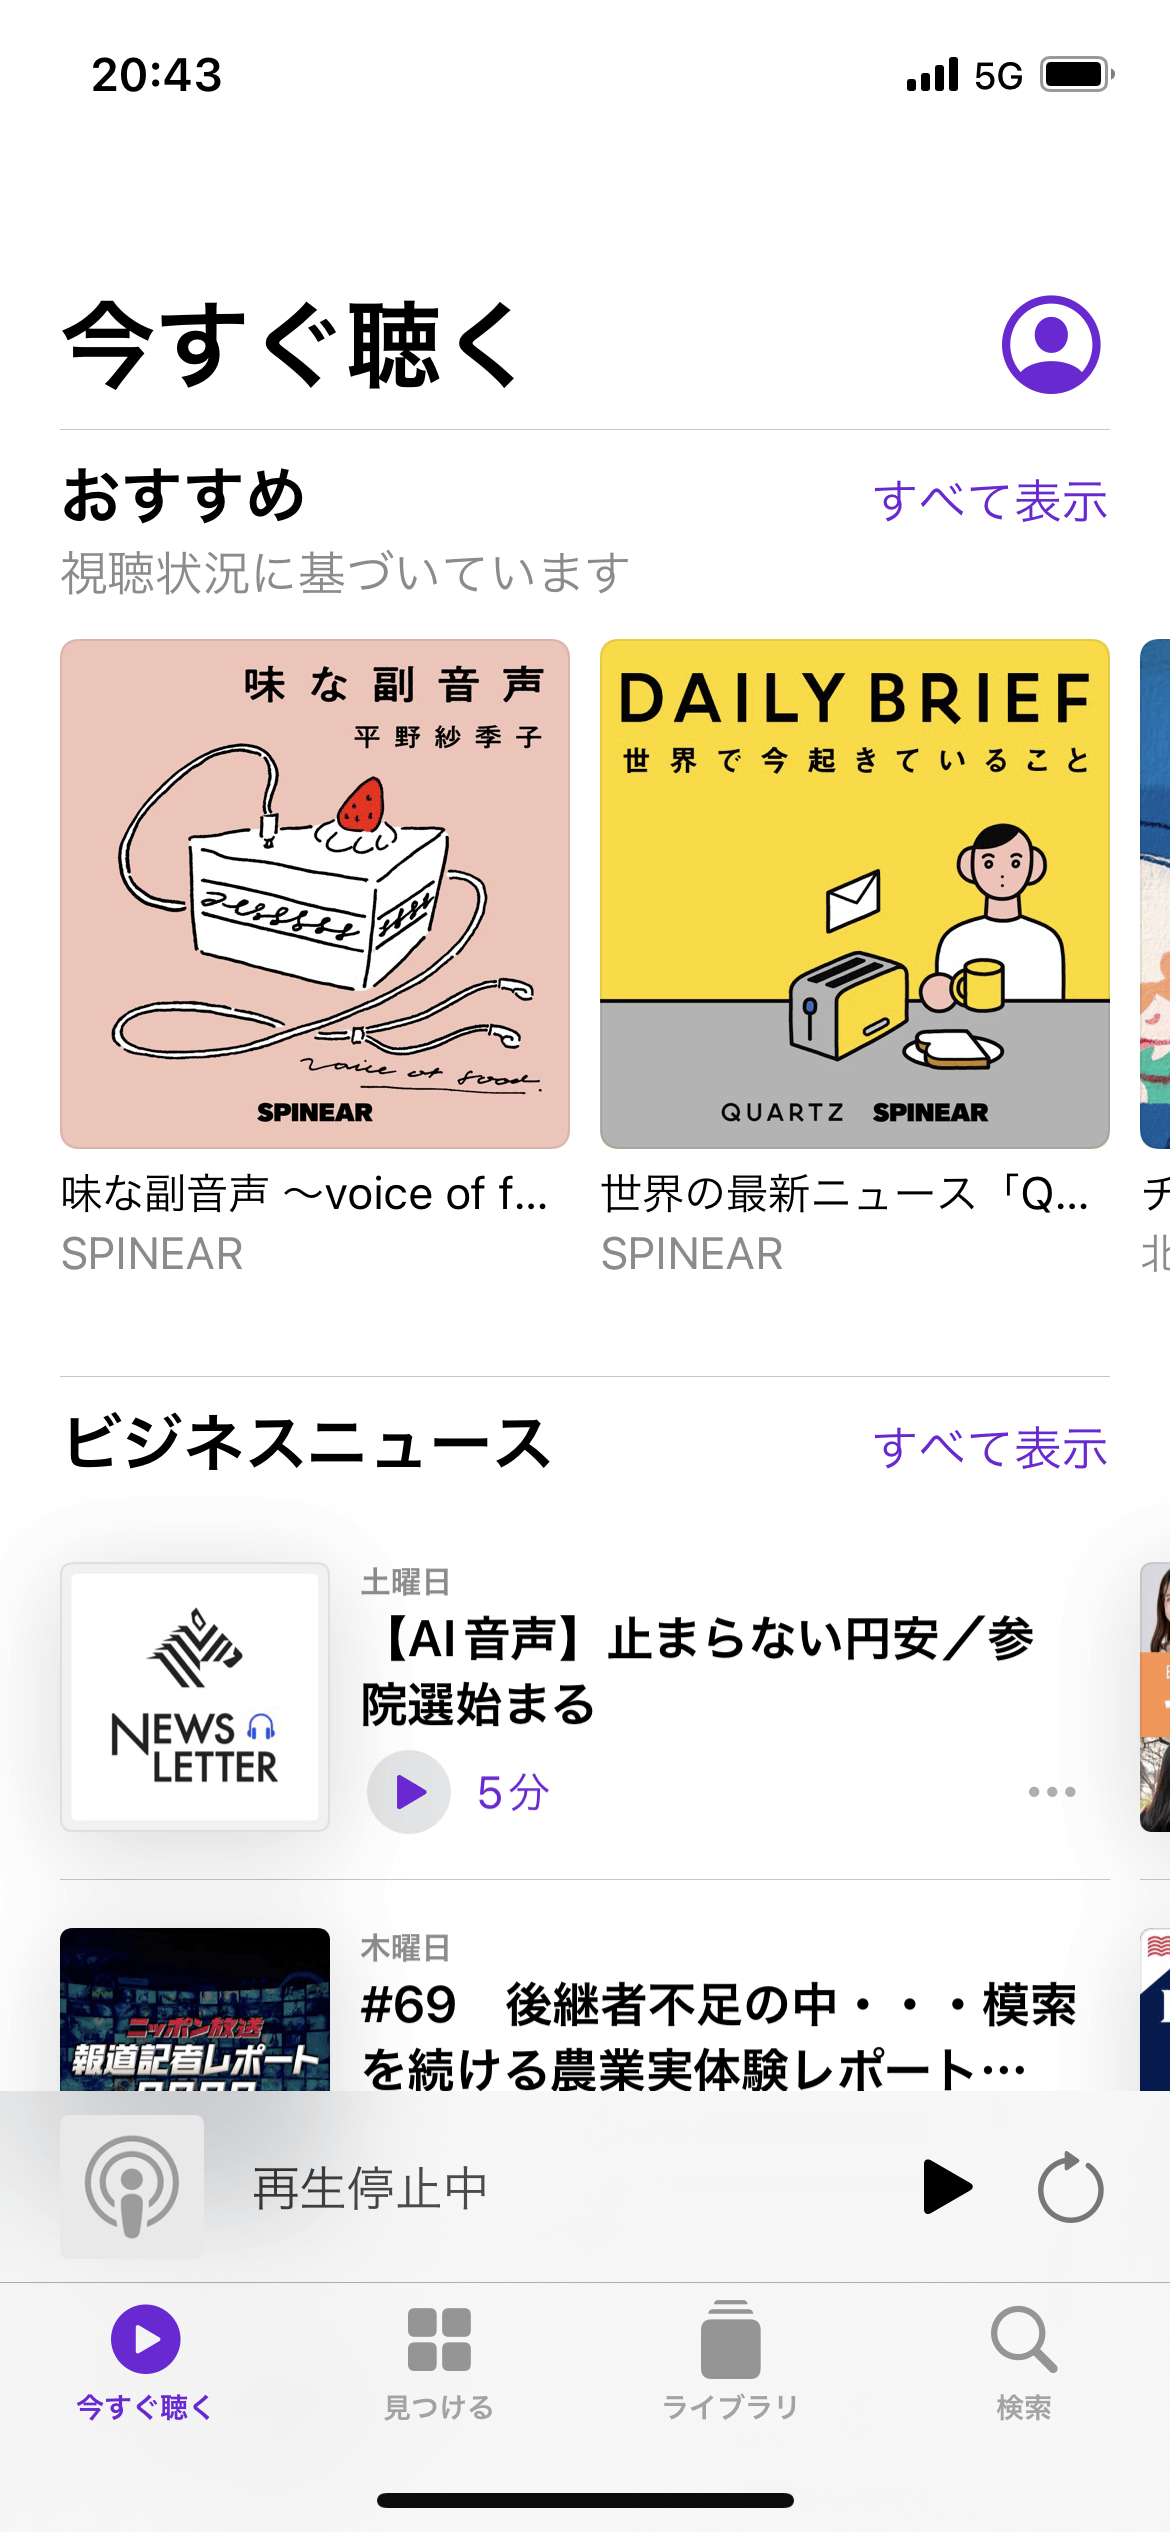 Podcasts 今すぐ聴く screen